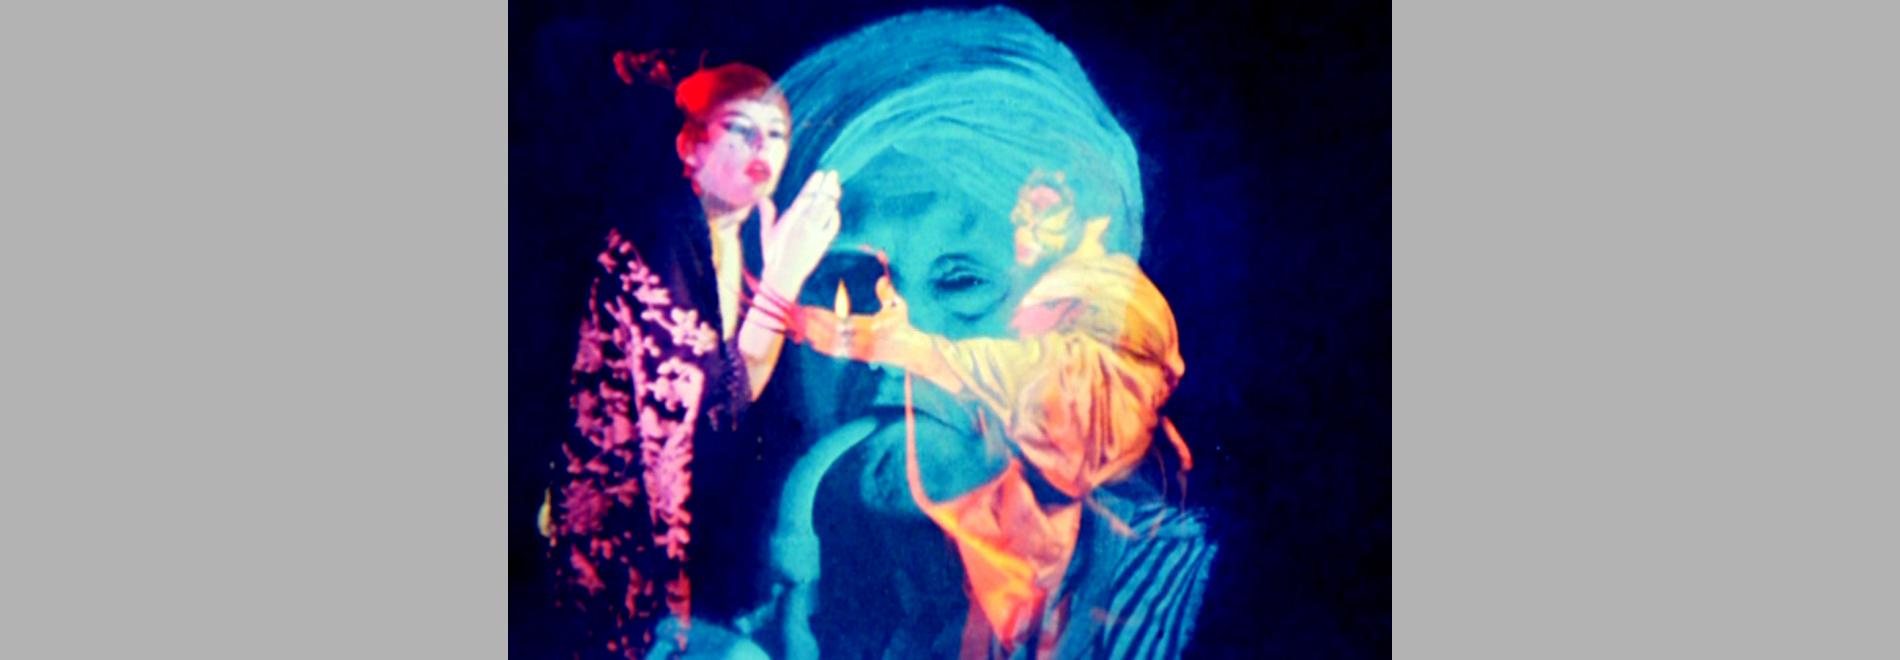 Inauguration of the Pleasure Dome (Kenneth Anger, 1954)